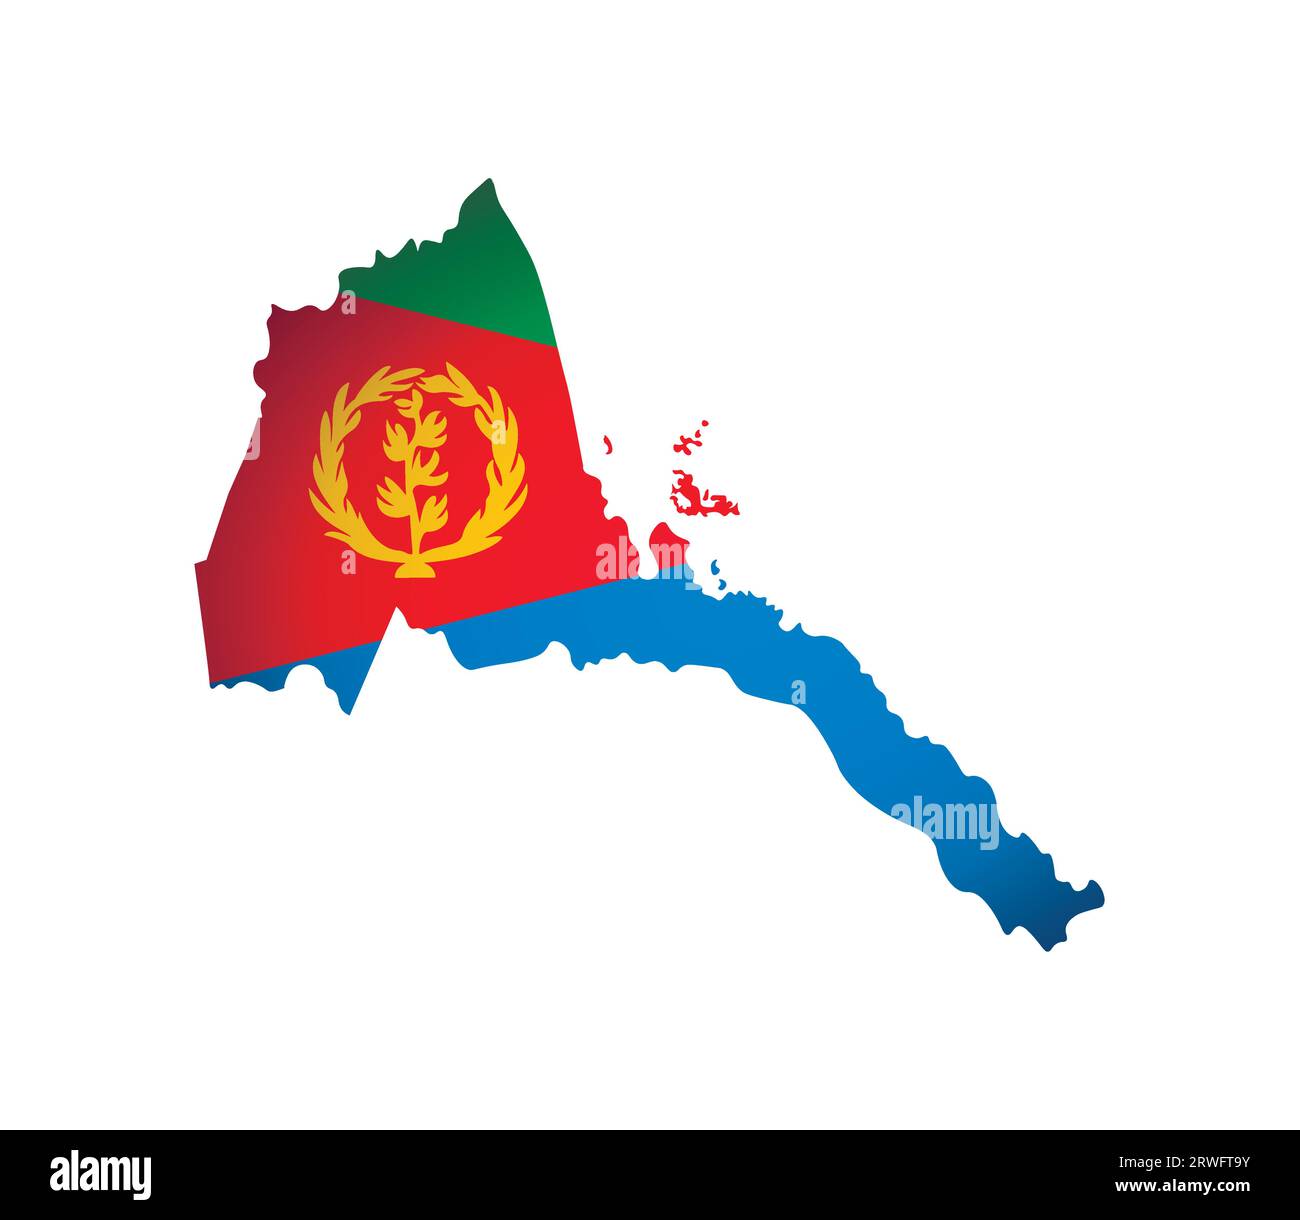 Vector illustration with national flag and map (simplified shape) of Eritrea. Volume shadow on the map. Stock Vector